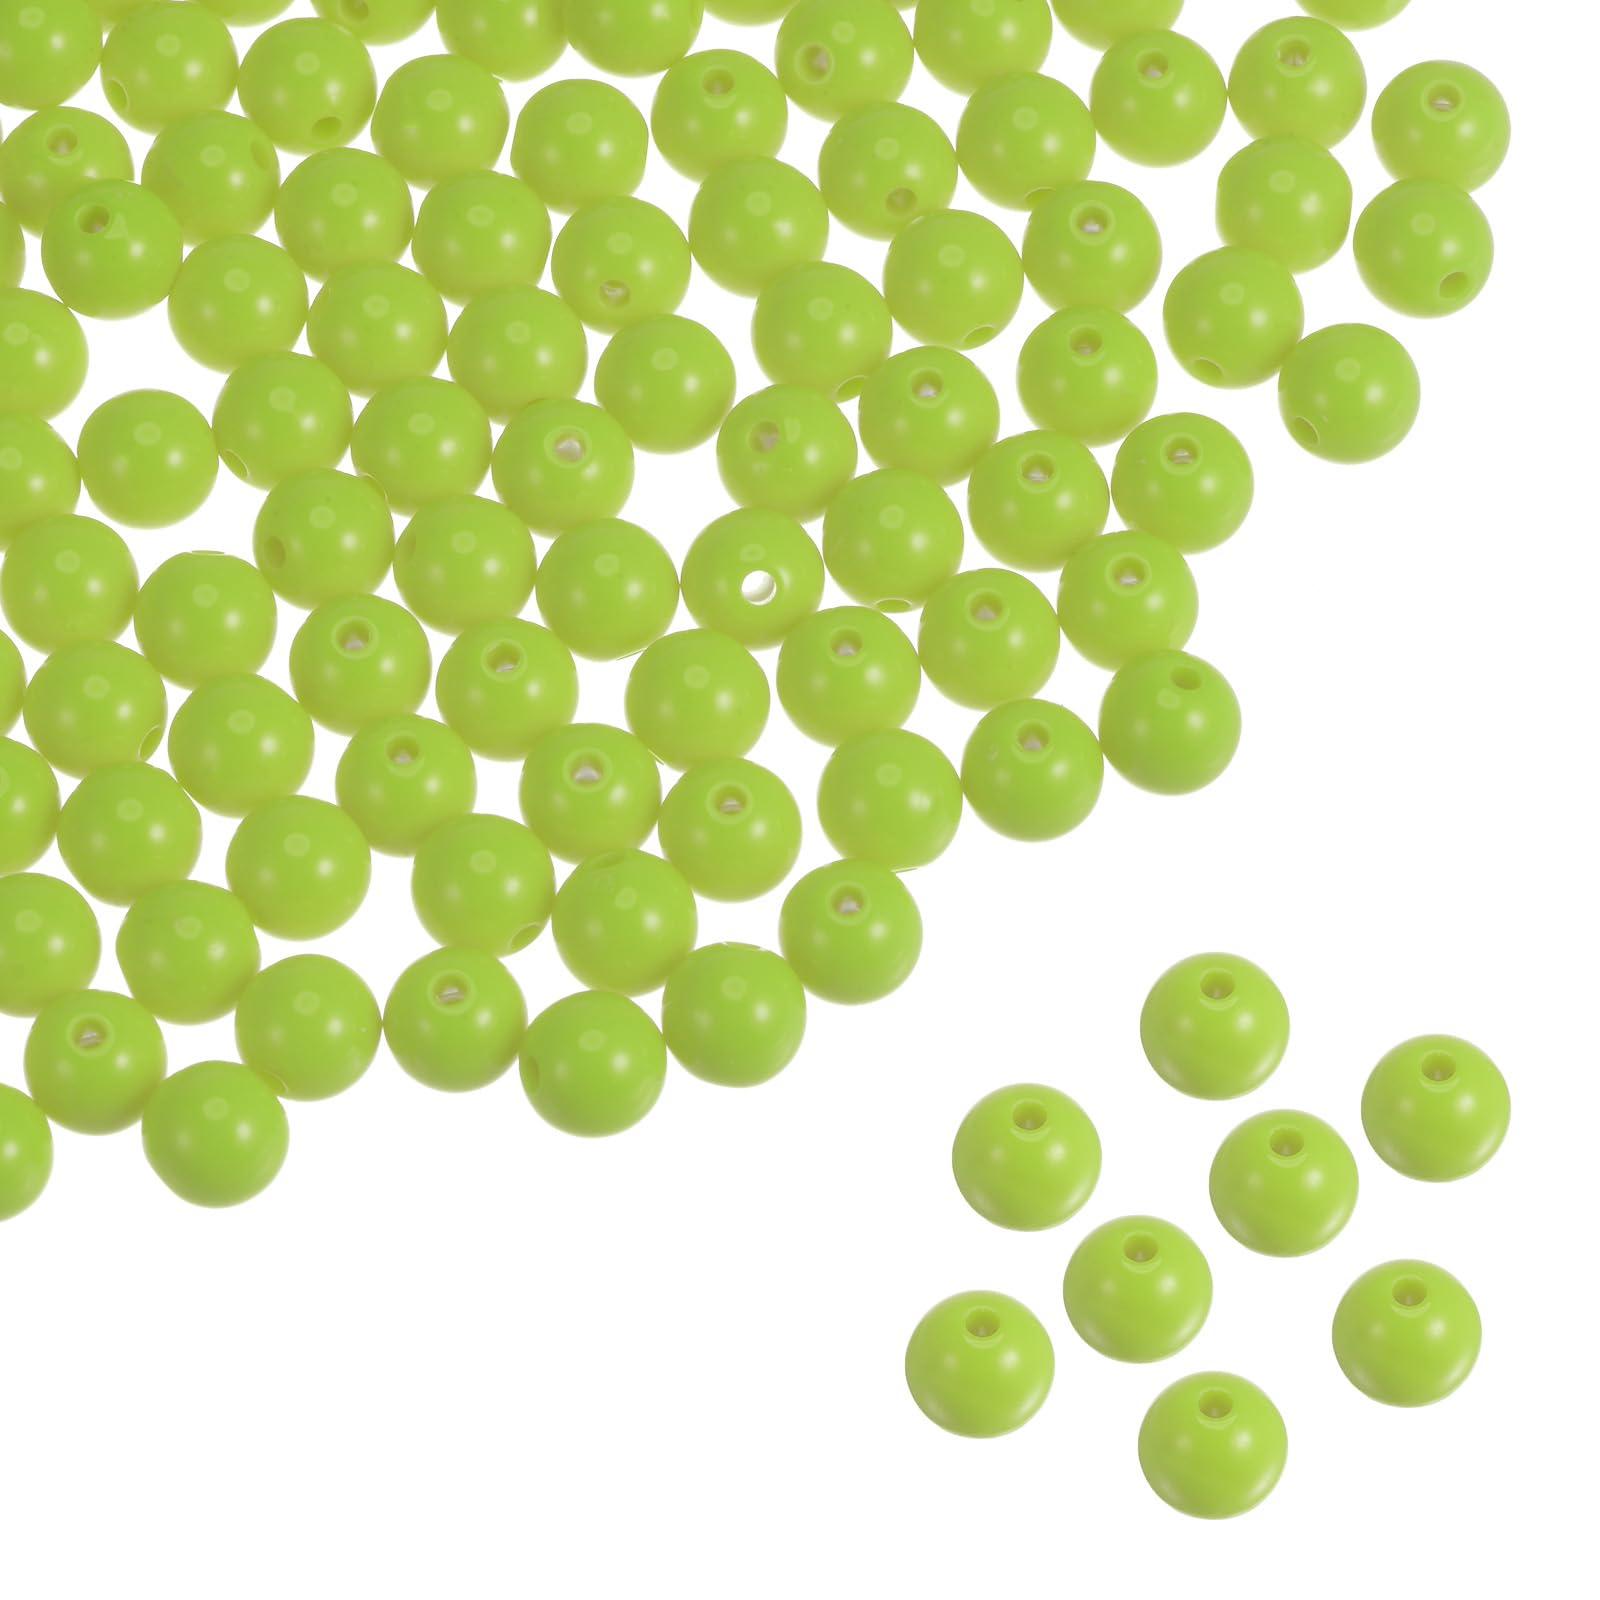 sourcing map 1700pcs Acrylic Round Beads 8mm Loose Bubble Craft Bead Assorted Candy Color for DIY Bracelet Earring Necklace Jewelry Making, Green